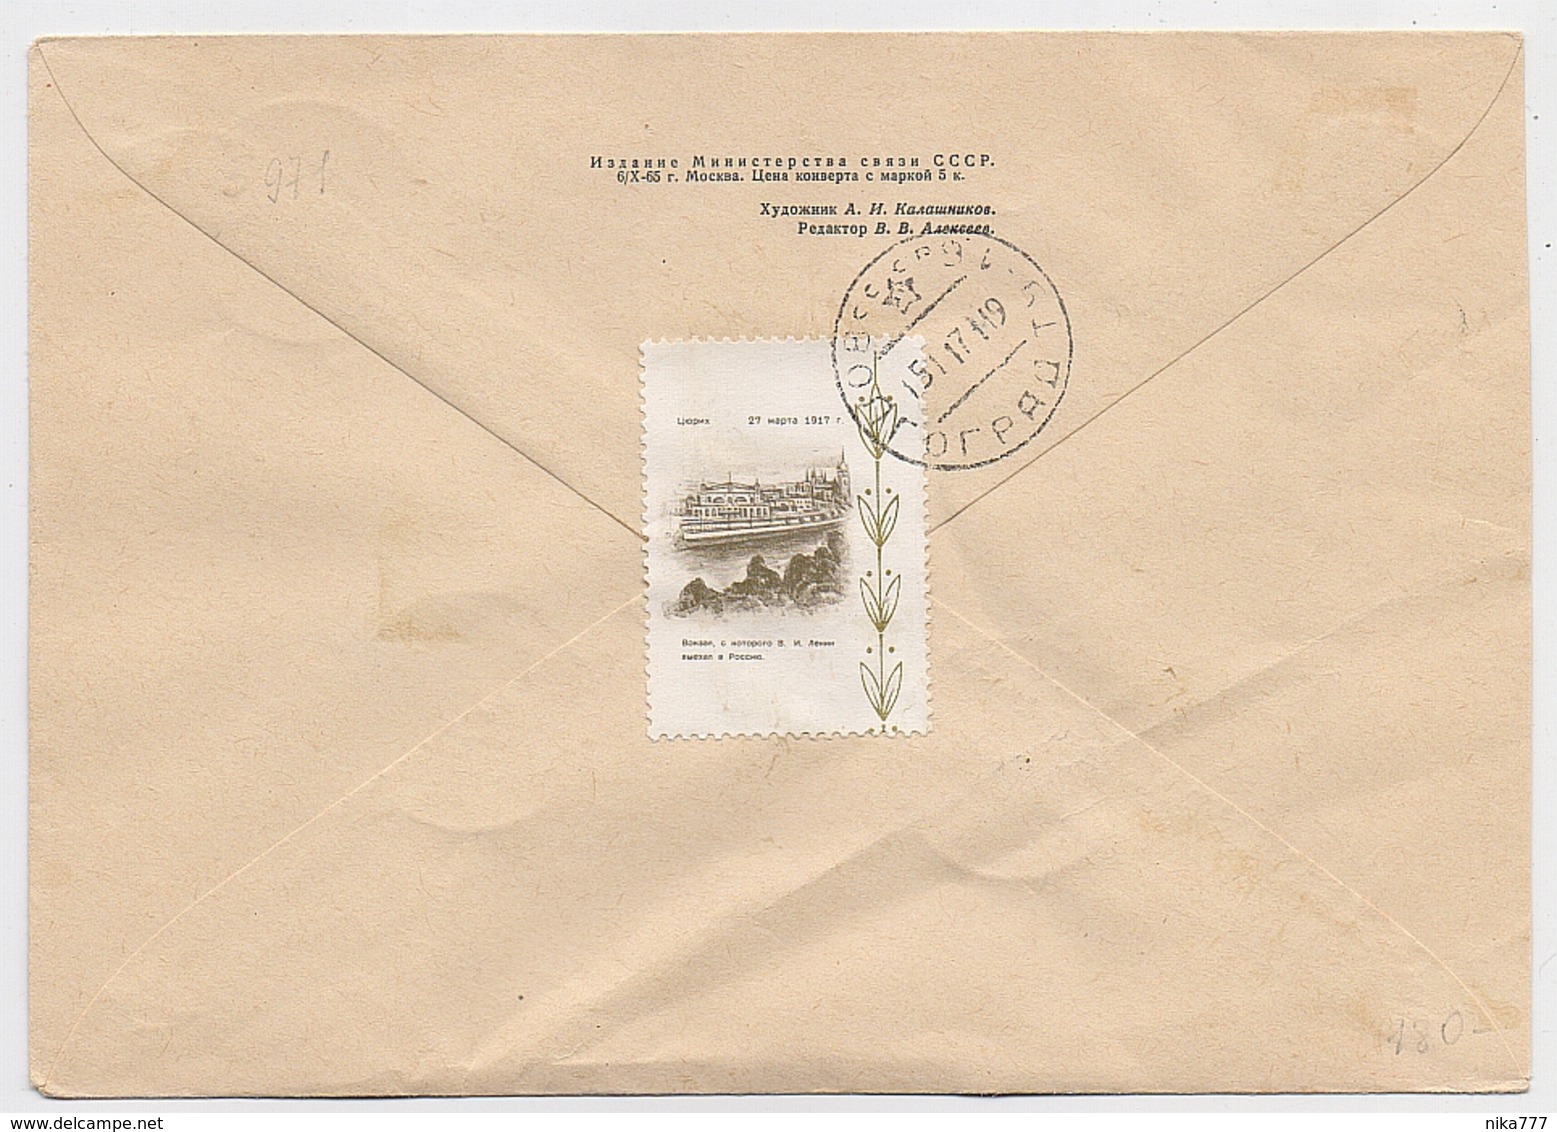 MAIL Post Stationery Cover USSR RUSSIA Sun Yat Sen China Chinese Label - Covers & Documents